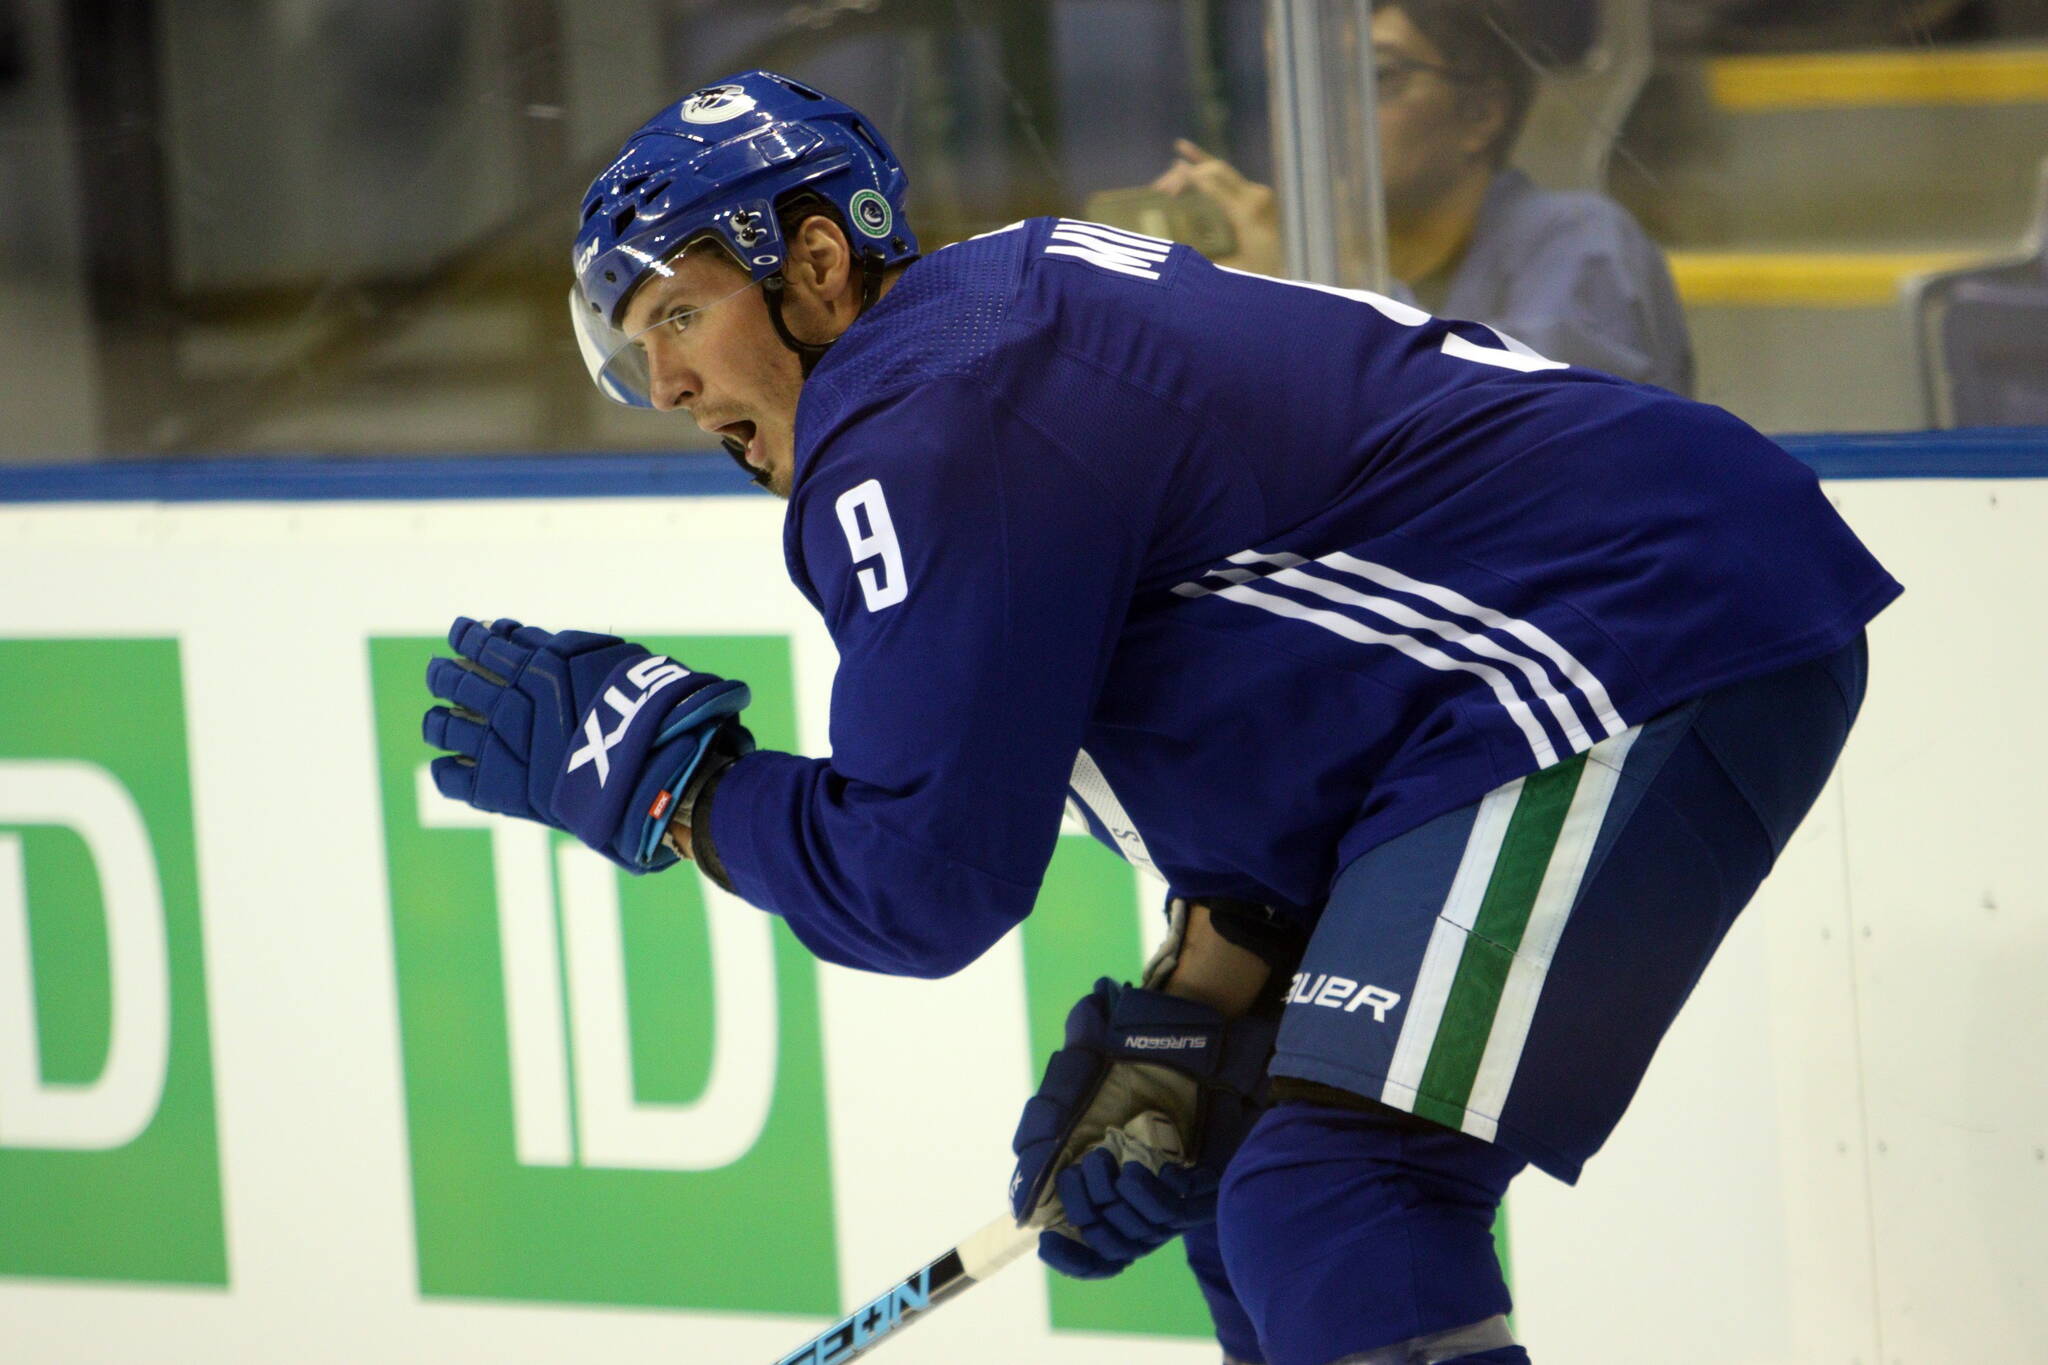 Vancouver Canucks’ JT Miller calls out a player during the Vancouver Canucks training camp at the Save-On-Foods Memorial Centre in Victoria, B.C., on Friday, Sept. 13, 2019. THE CANADIAN PRESS/Chad Hipolito